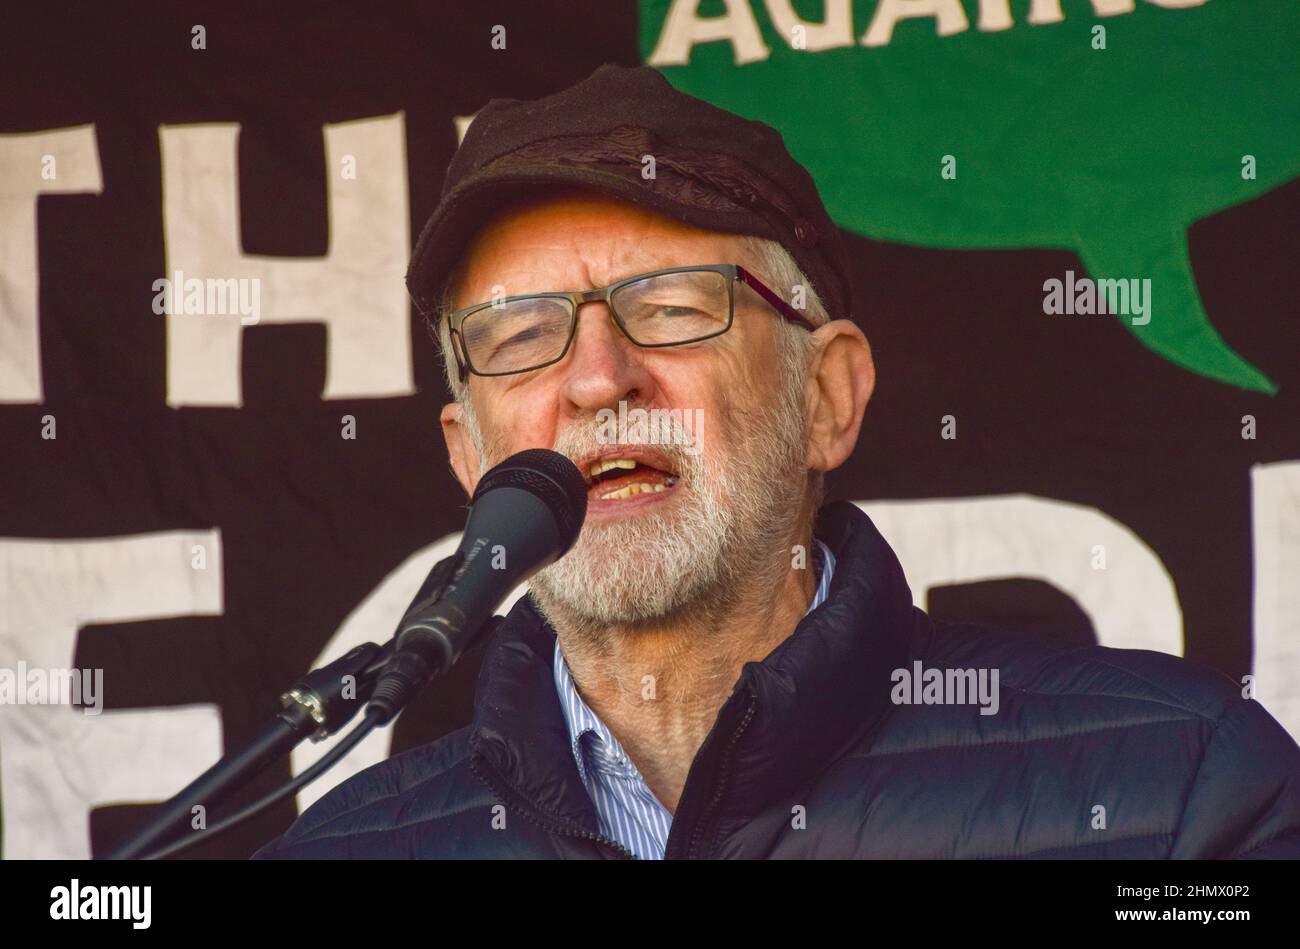 London, UK. 12th February 2022. Labour MP Jeremy Corbyn speaks during the protest. Demonstrators gathered in Parliament Square in protest against the increases in energy prices, fuel poverty and costs of living. Stock Photo